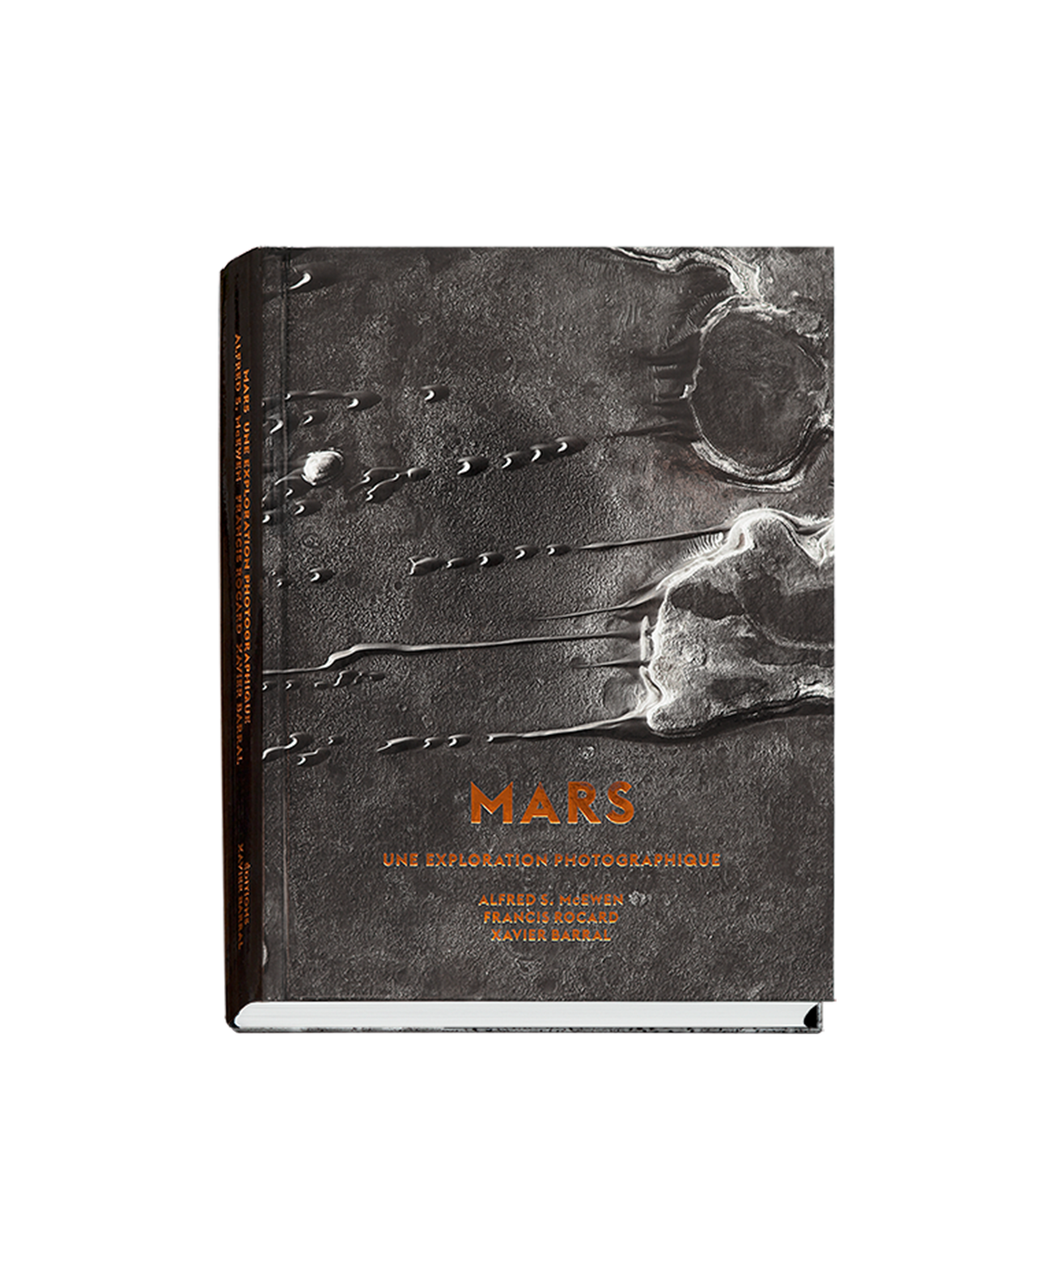 FRANCIS ROCARD & ALFRED S. MCEWEN - MARS, A PHOTOGRAPHIC EXPLORATION